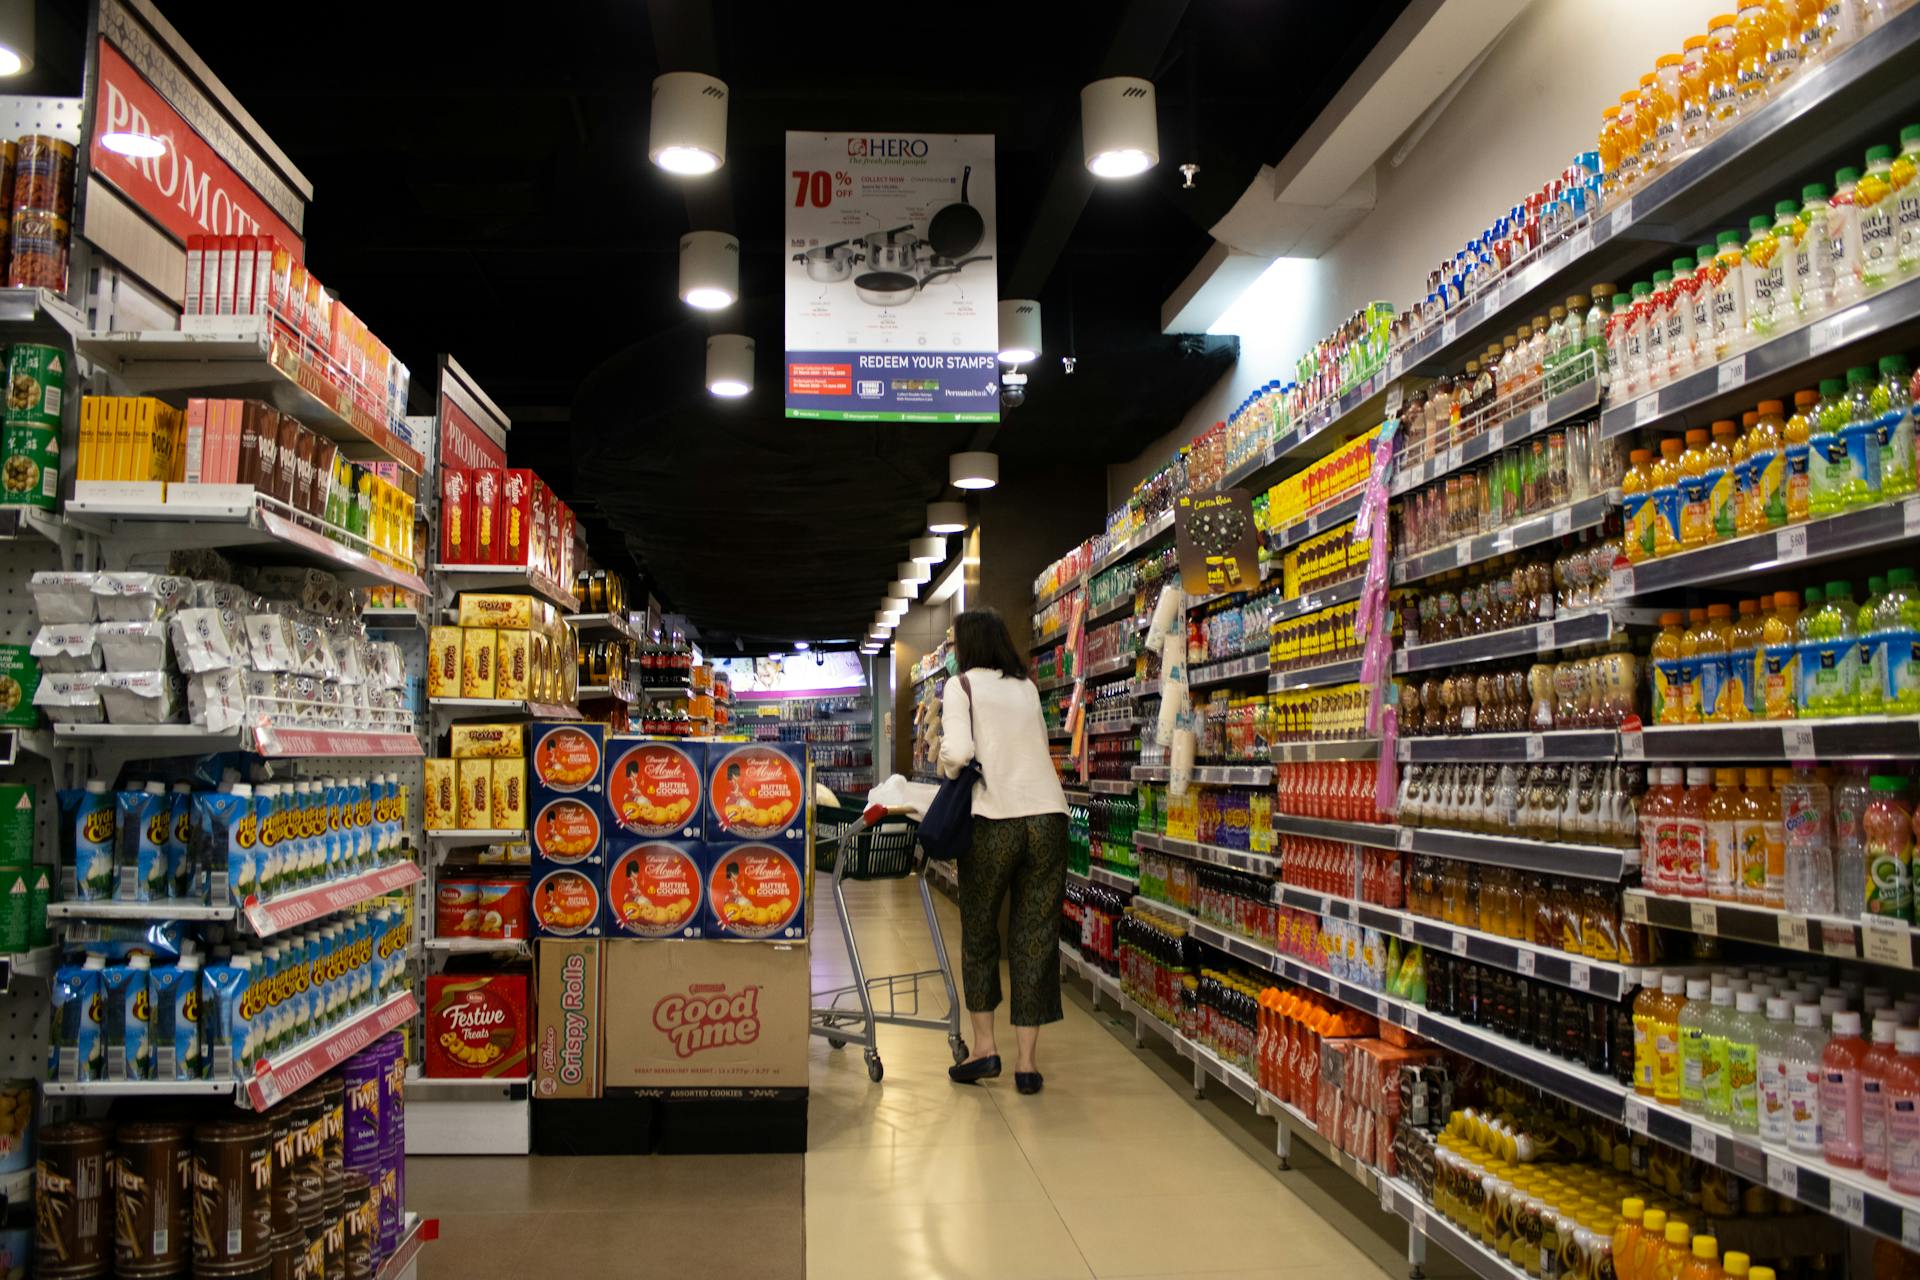 An aisle in a supermarket | Source: Pexels